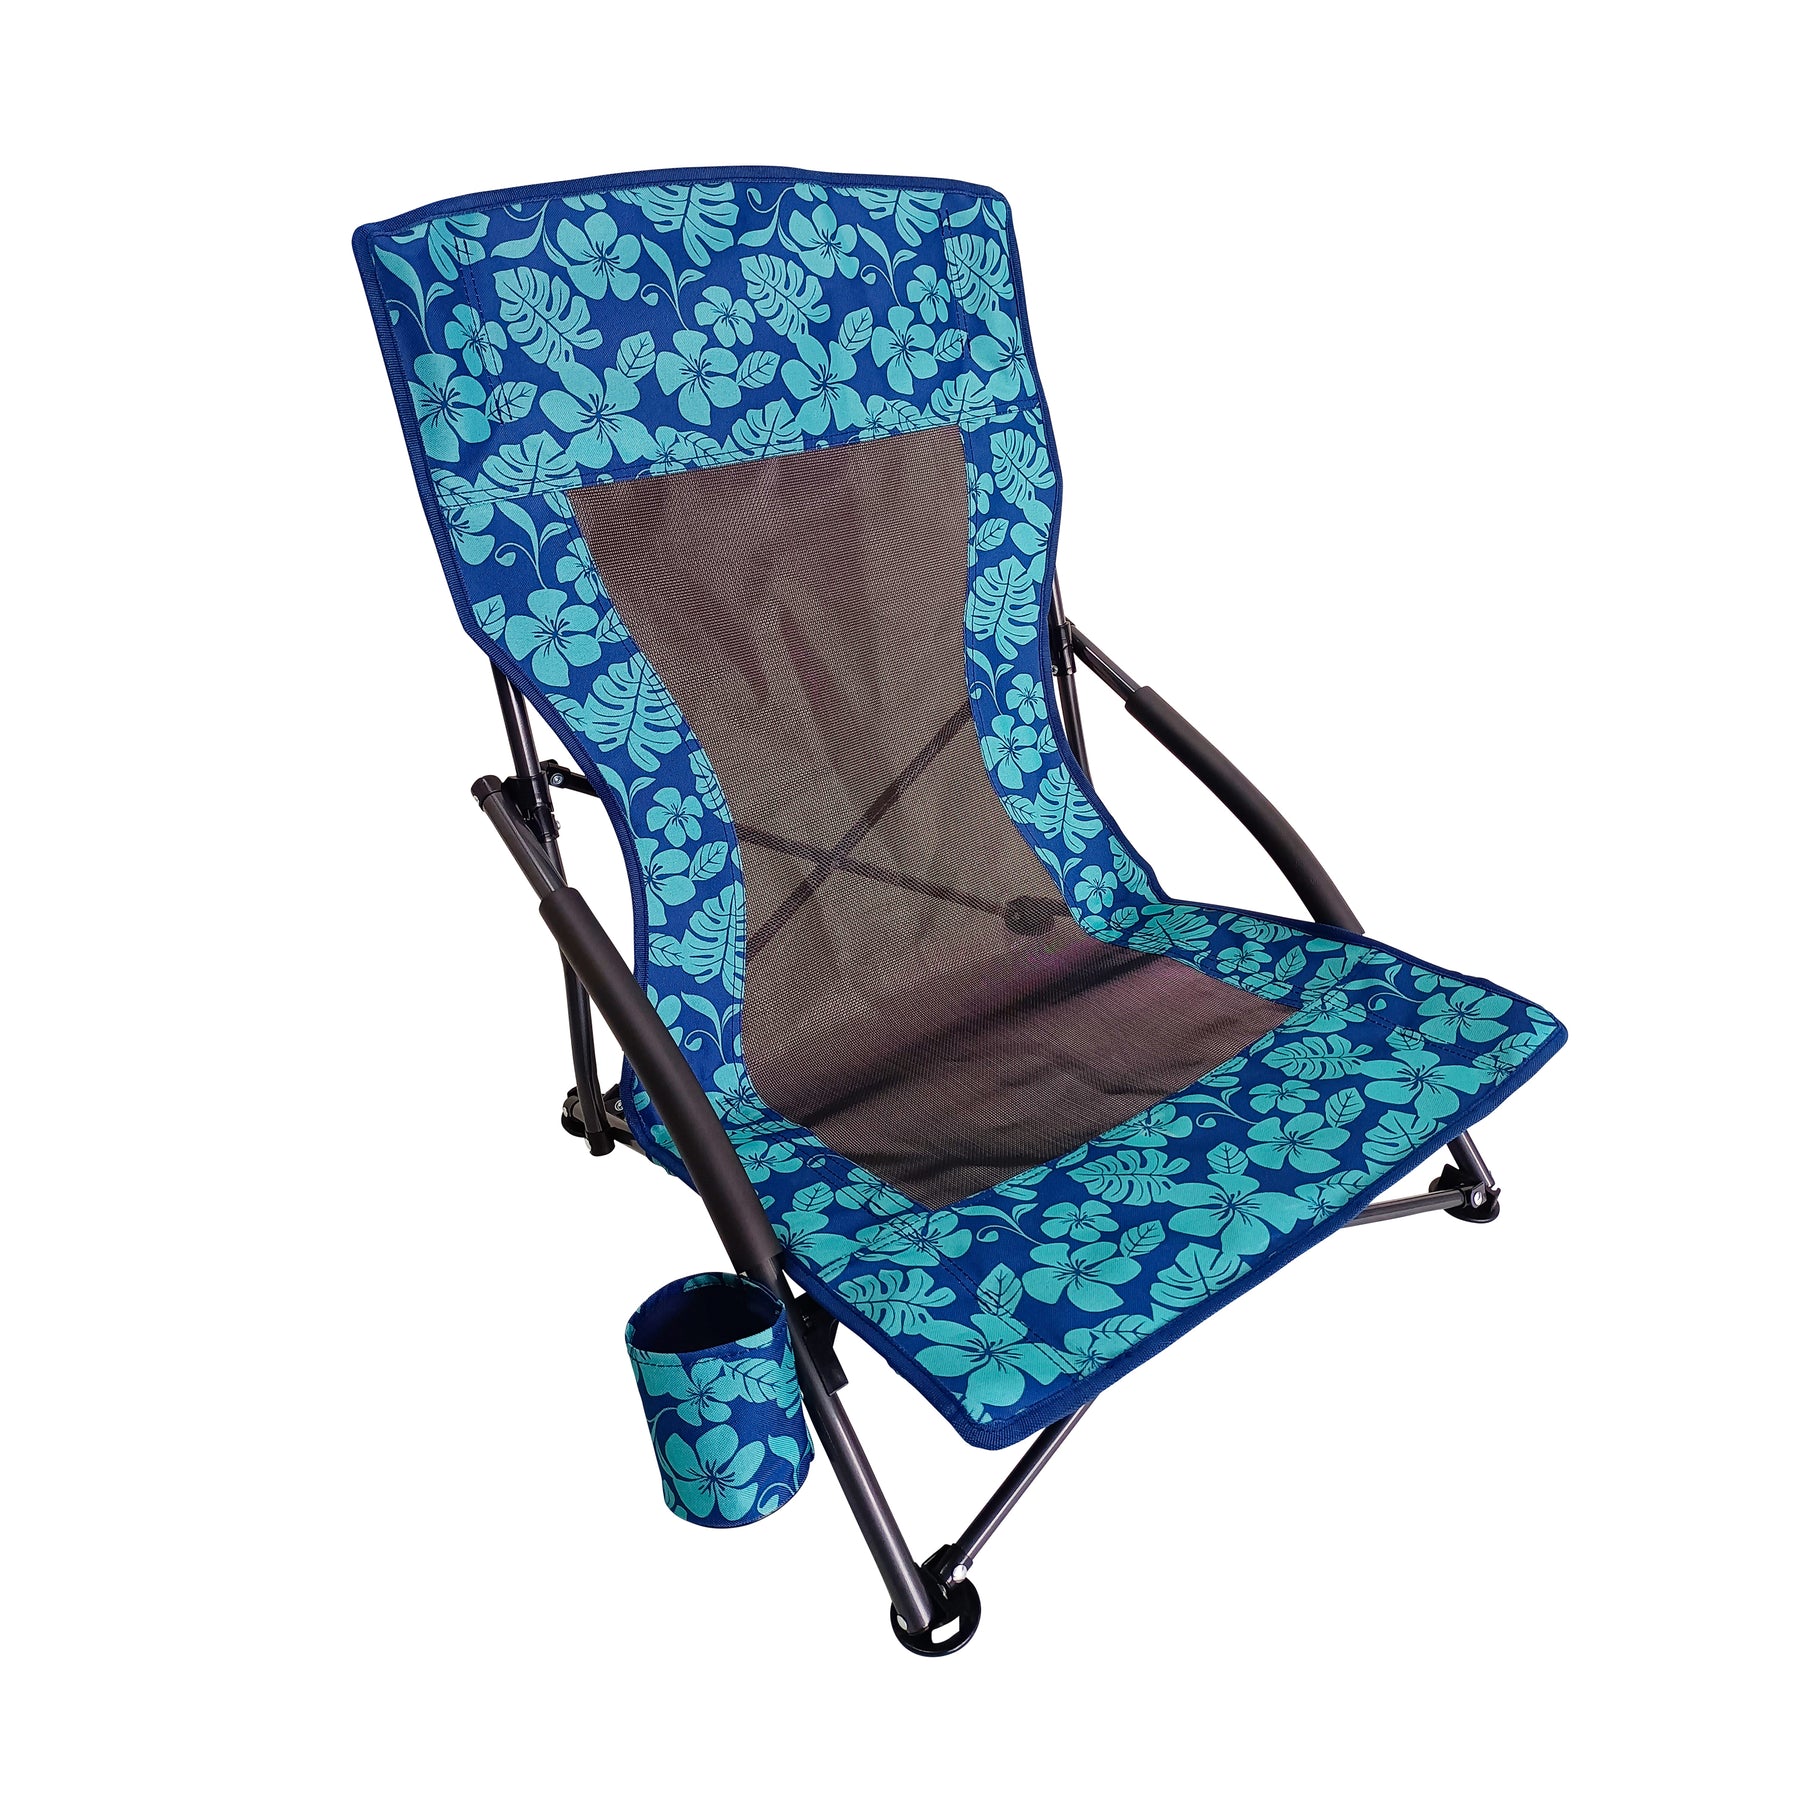 Bliss Hammocks Collapsible Beach Chair with Cup Holders. Blue Flowers Variation is a blue color with a flower pattern.